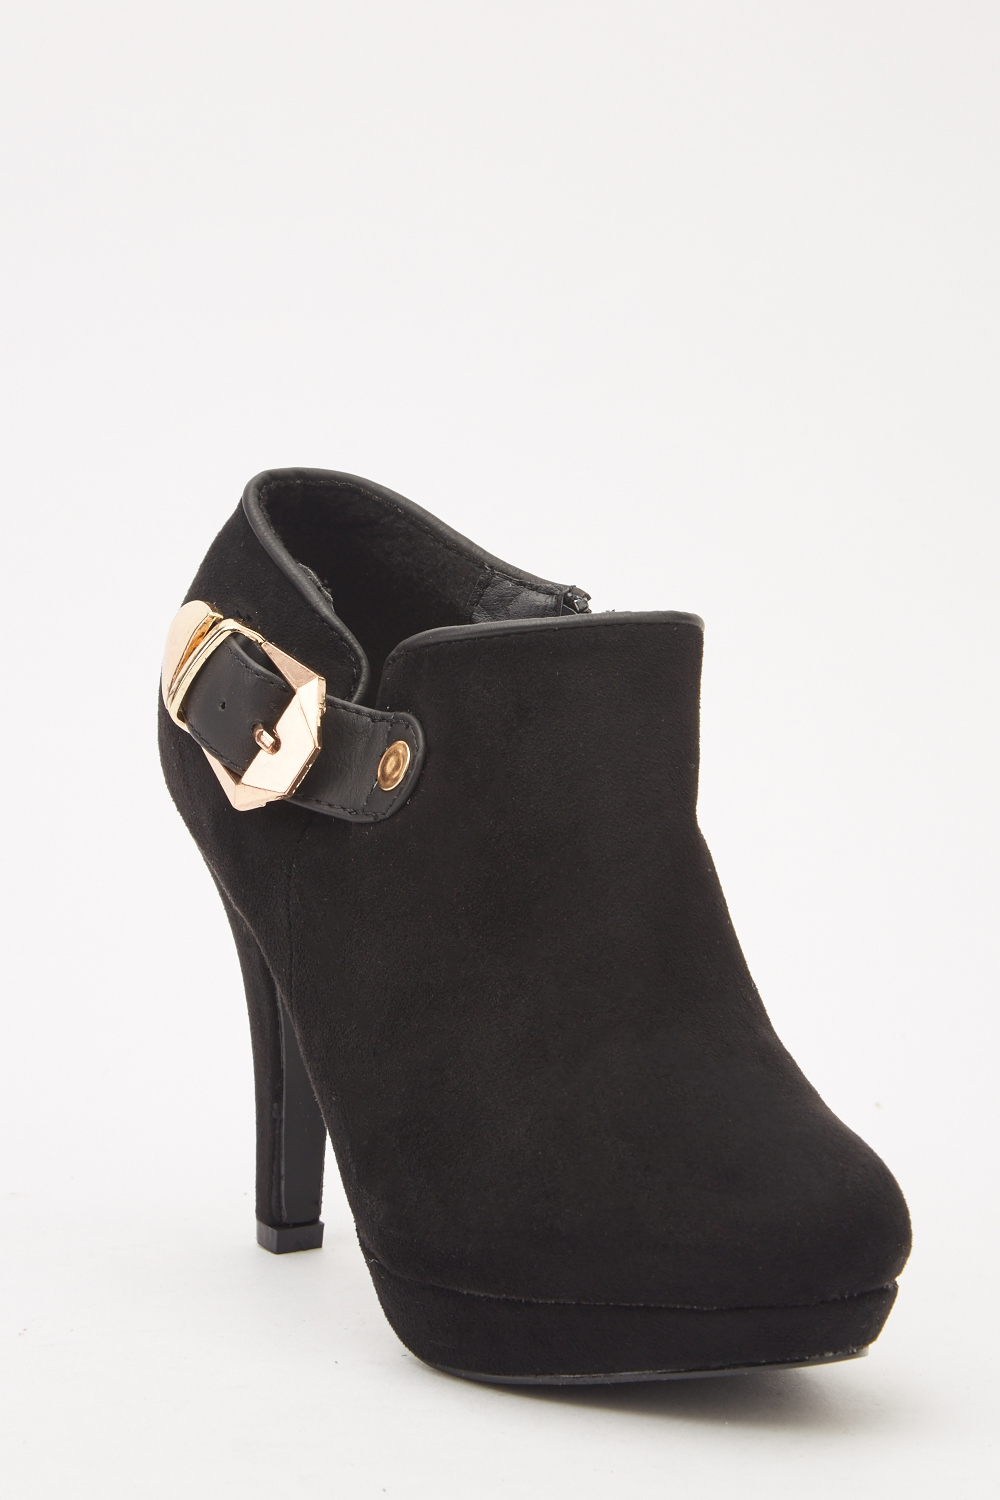 Suedette Heeled Mule Boots - Just $6